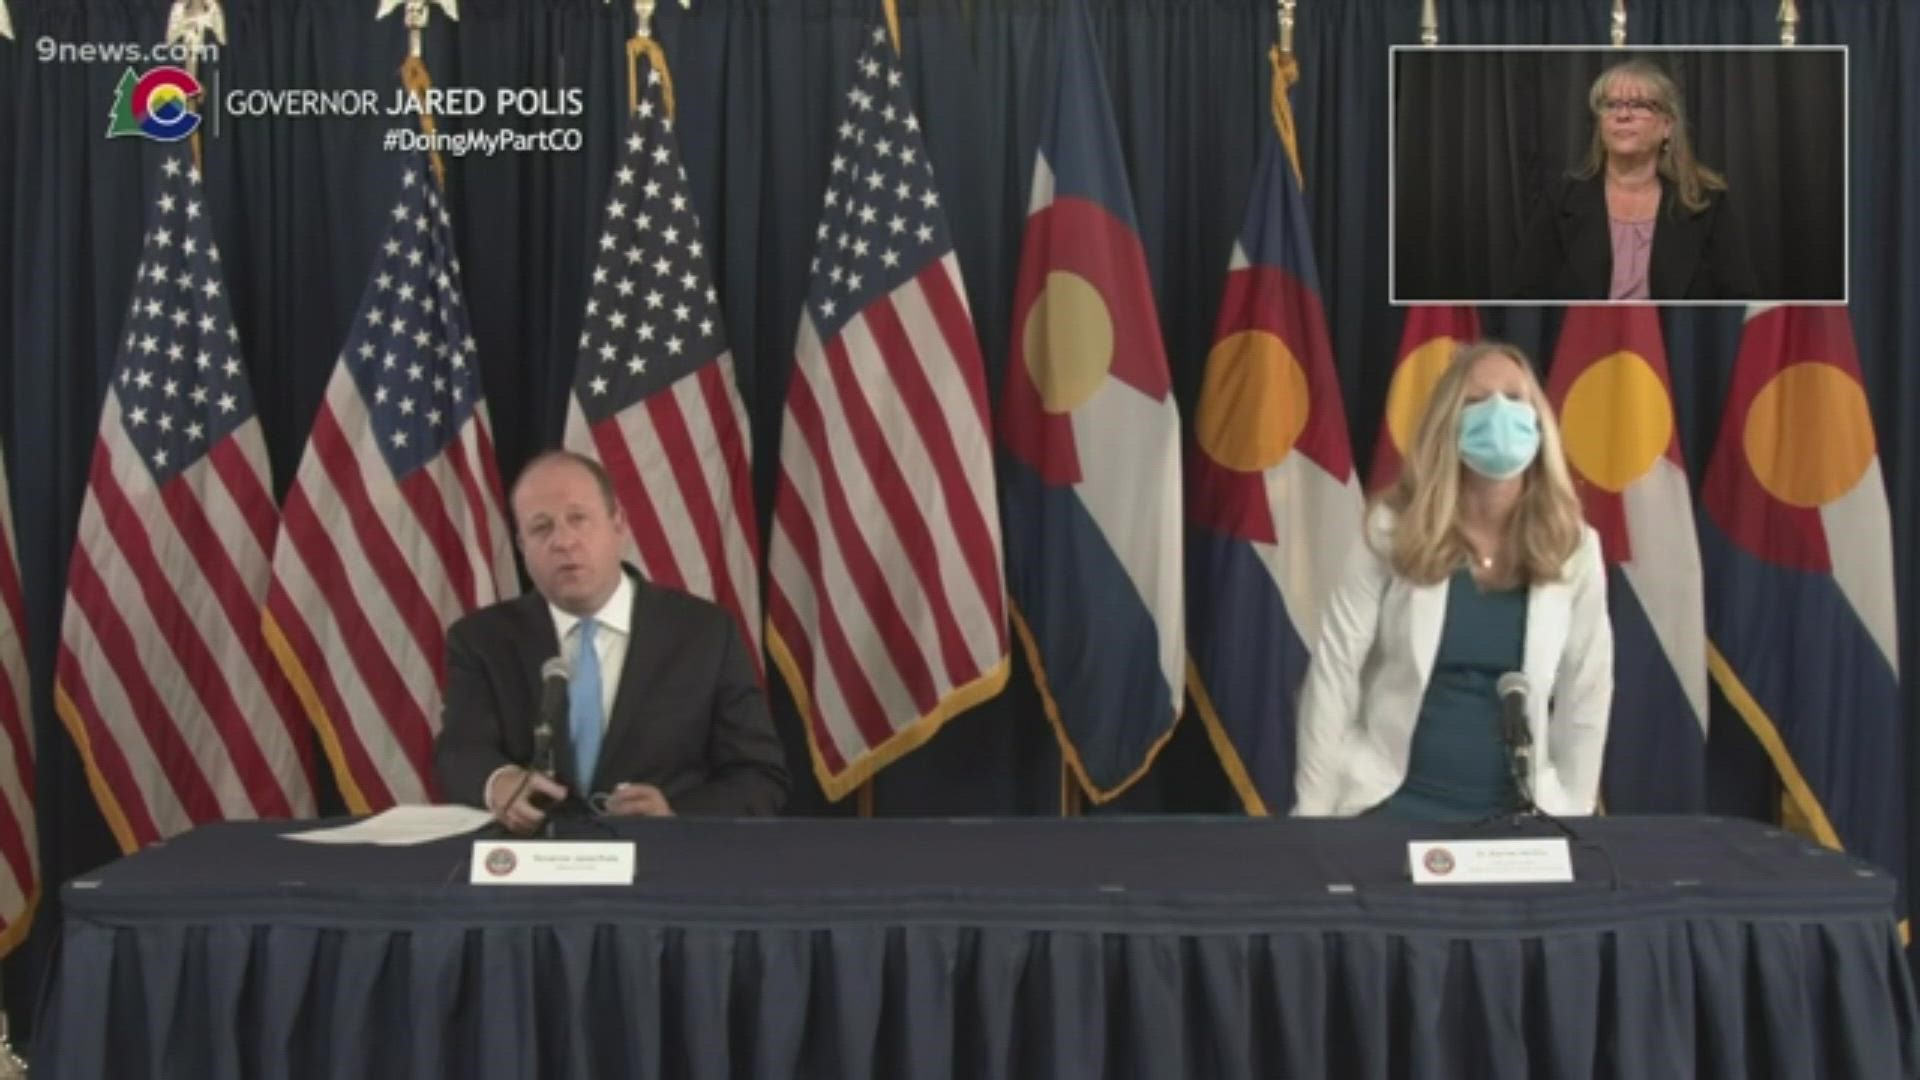 Gov. Jared Polis provided an update on COVID-19 in Colorado, including an announcement that last call will be moved to 11 p.m.